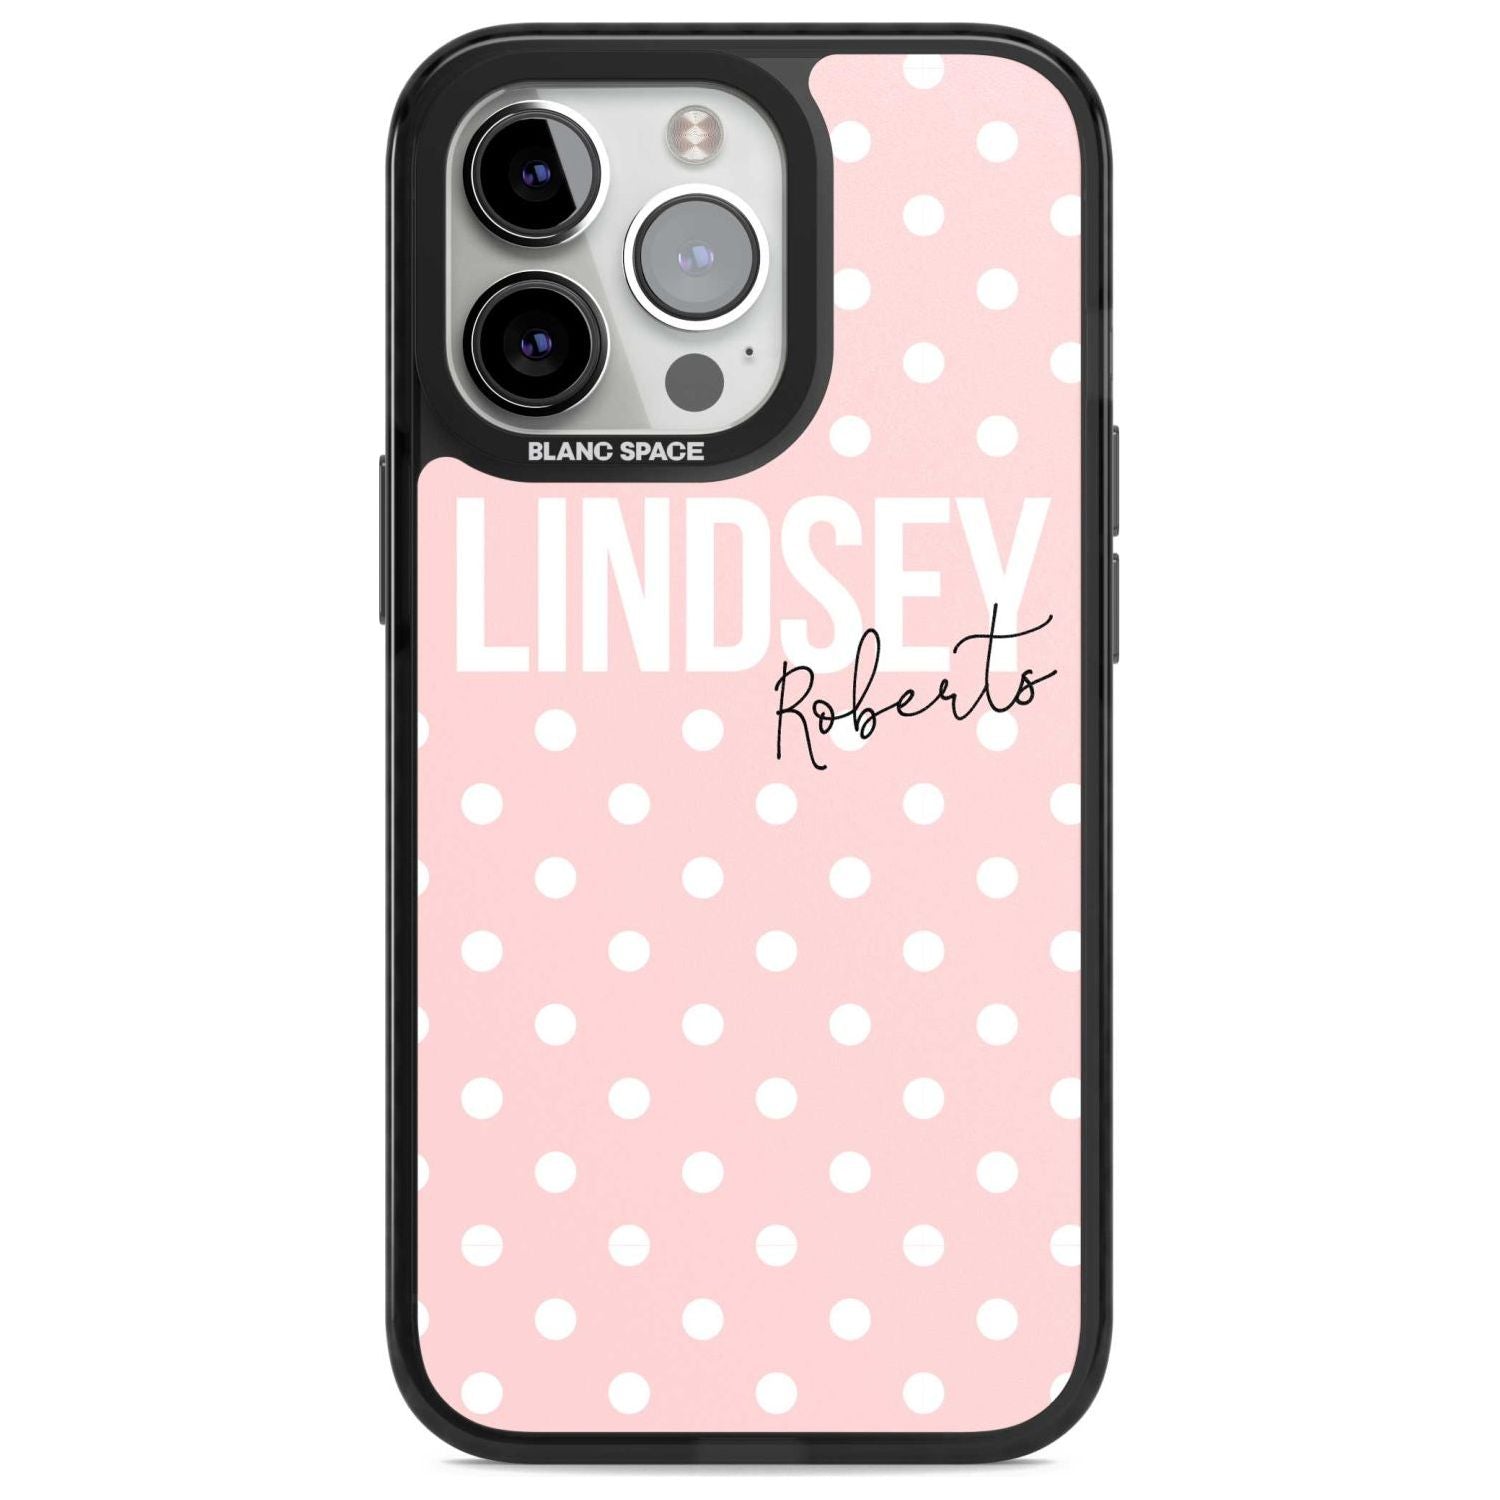 Personalised Pink Polka Custom Phone Case iPhone 15 Pro Max / Magsafe Black Impact Case,iPhone 15 Pro / Magsafe Black Impact Case,iPhone 14 Pro Max / Magsafe Black Impact Case,iPhone 14 Pro / Magsafe Black Impact Case,iPhone 13 Pro / Magsafe Black Impact Case Blanc Space